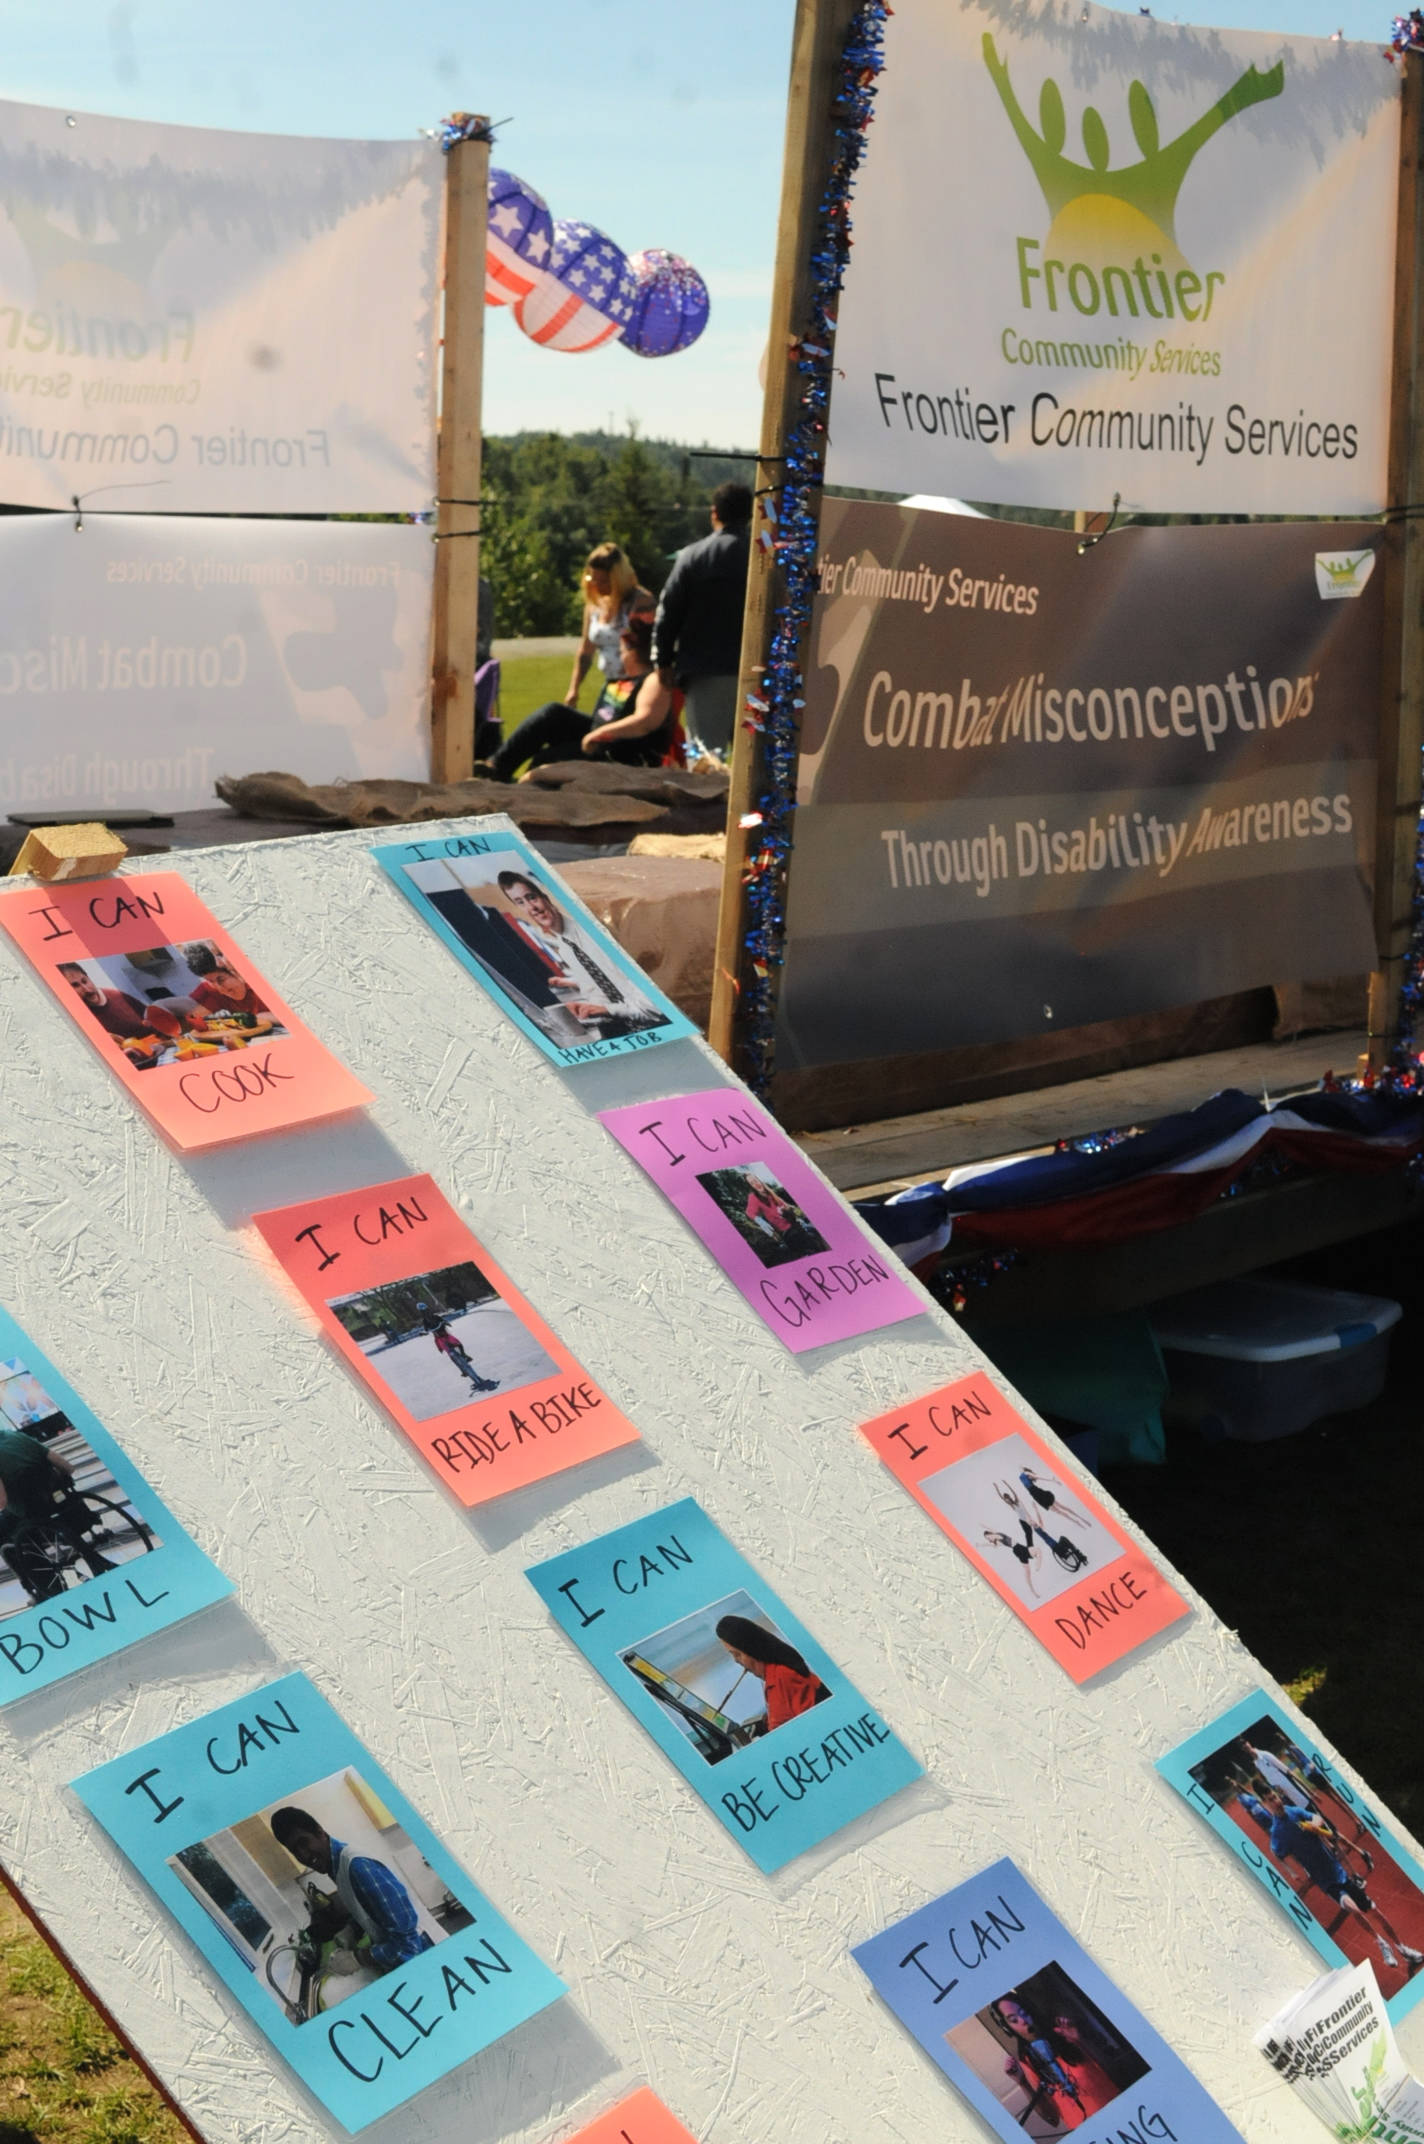 Photos of people who experience disabilities participating in various activities cover a board at the Disability Pride event at Soldotna Creek Park on Saturday, July 21, 2018 in Soldotna, Alaska. (Photo by Elizabeth Earl/Peninsula Clarion)